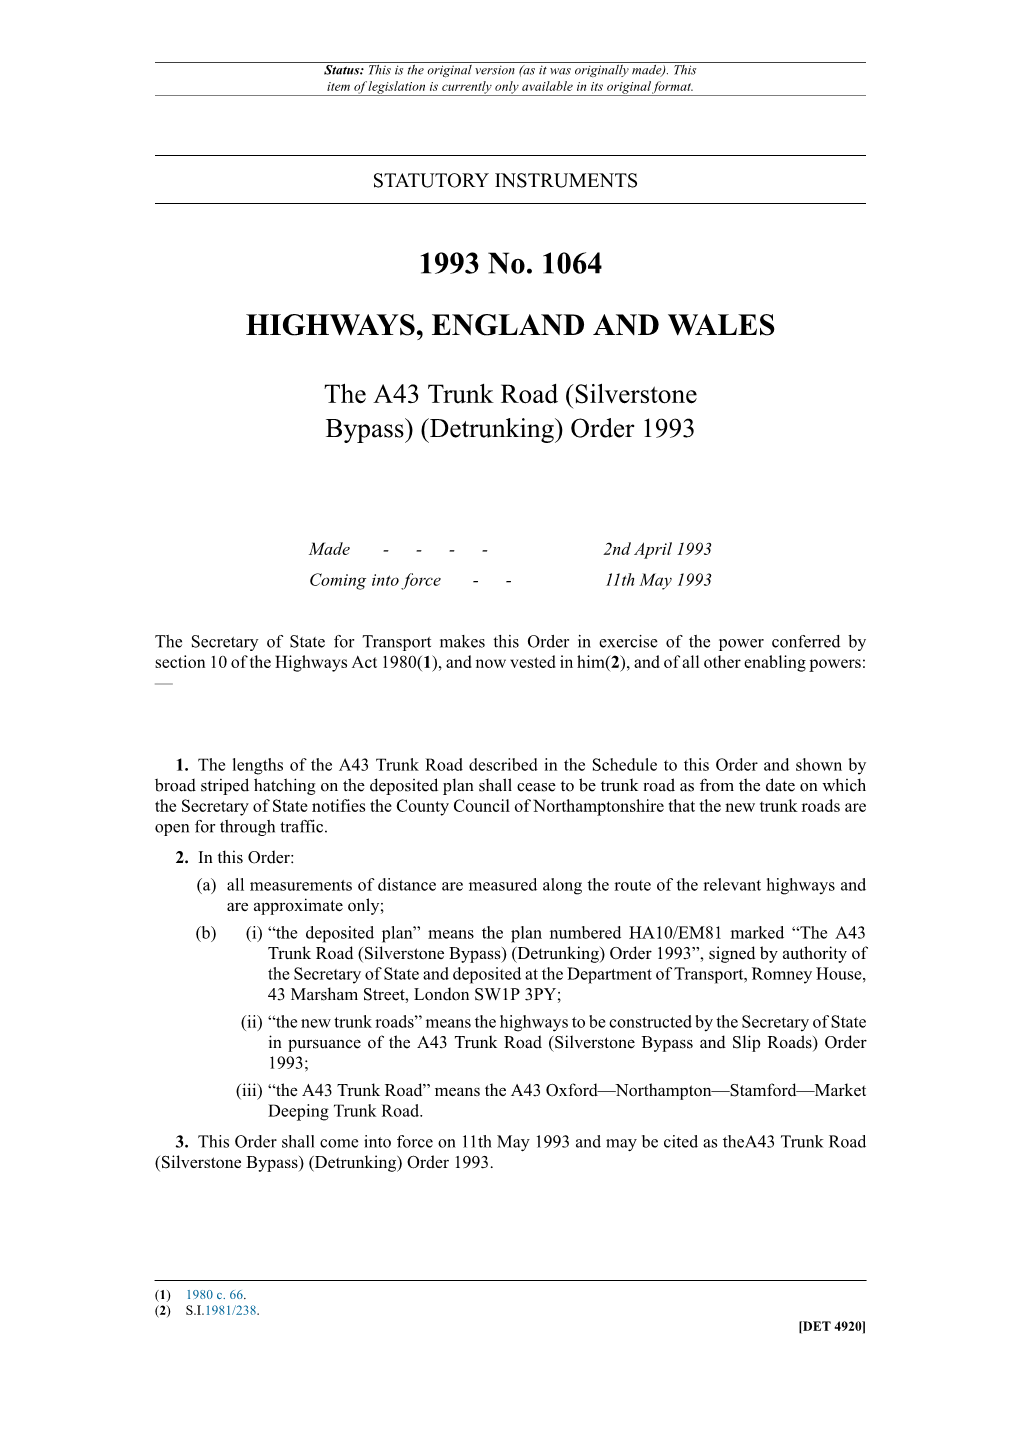 The A43 Trunk Road (Silverstone Bypass) (Detrunking) Order 1993